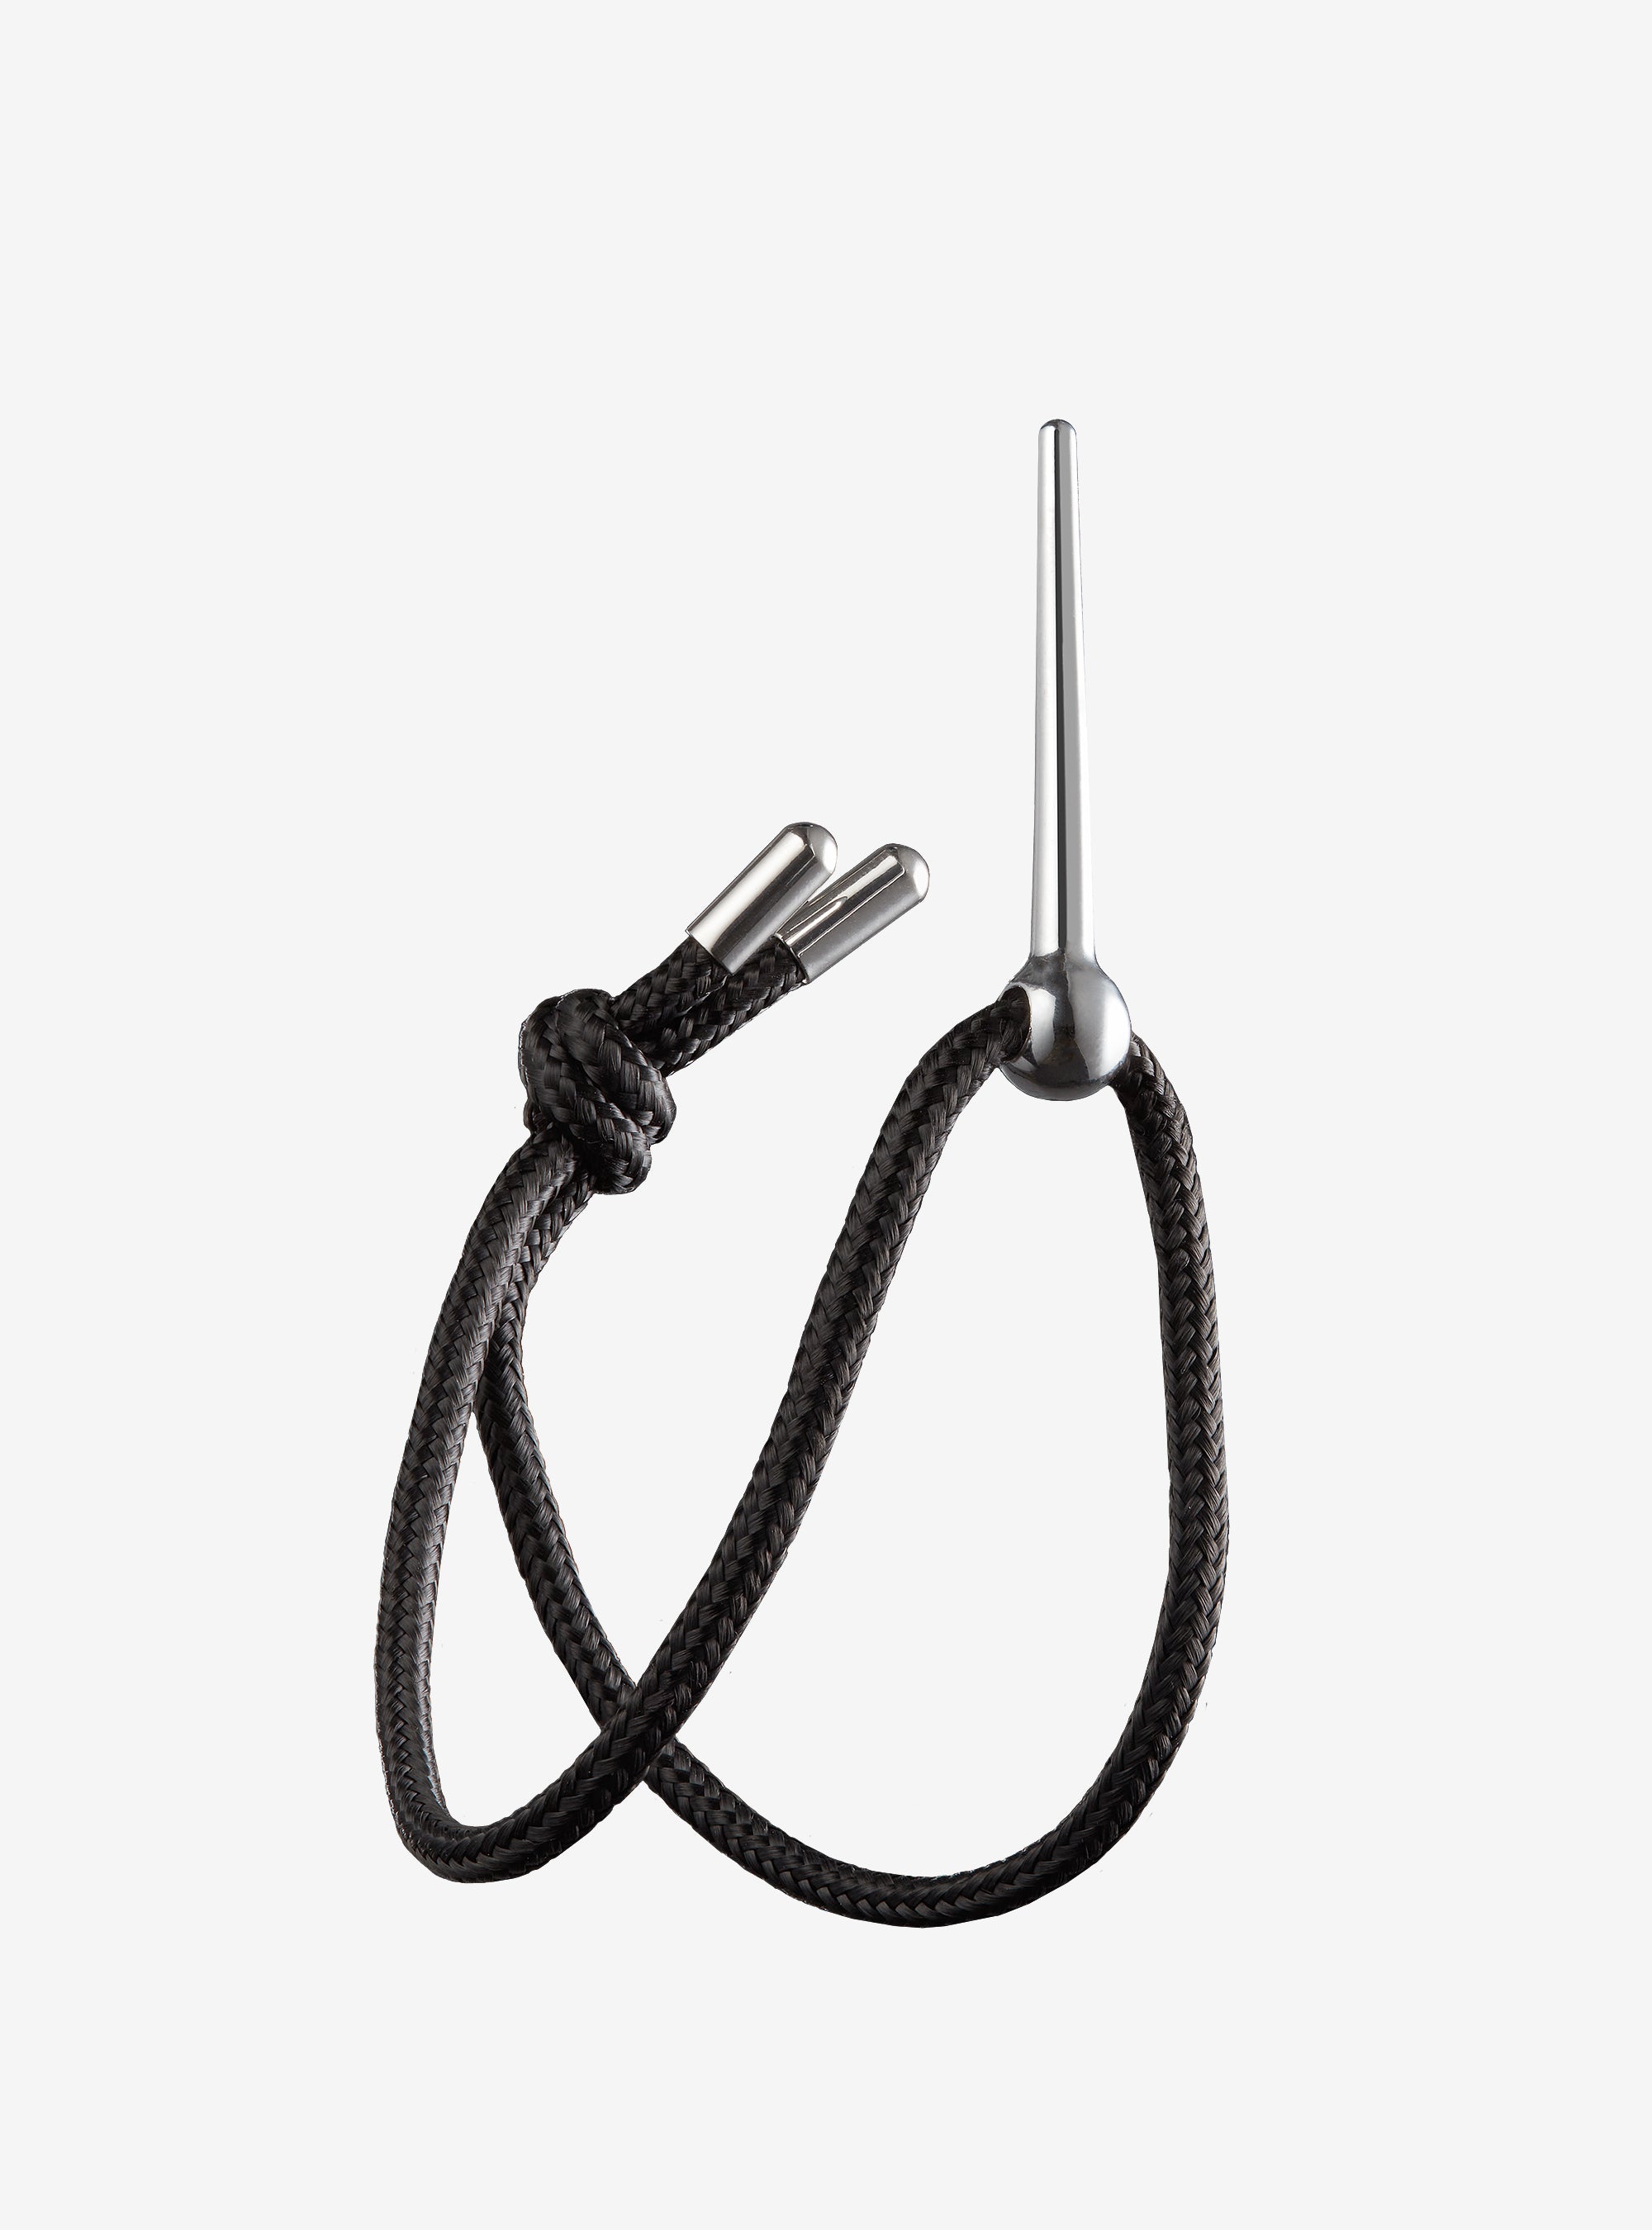 Carry Tool & Cord